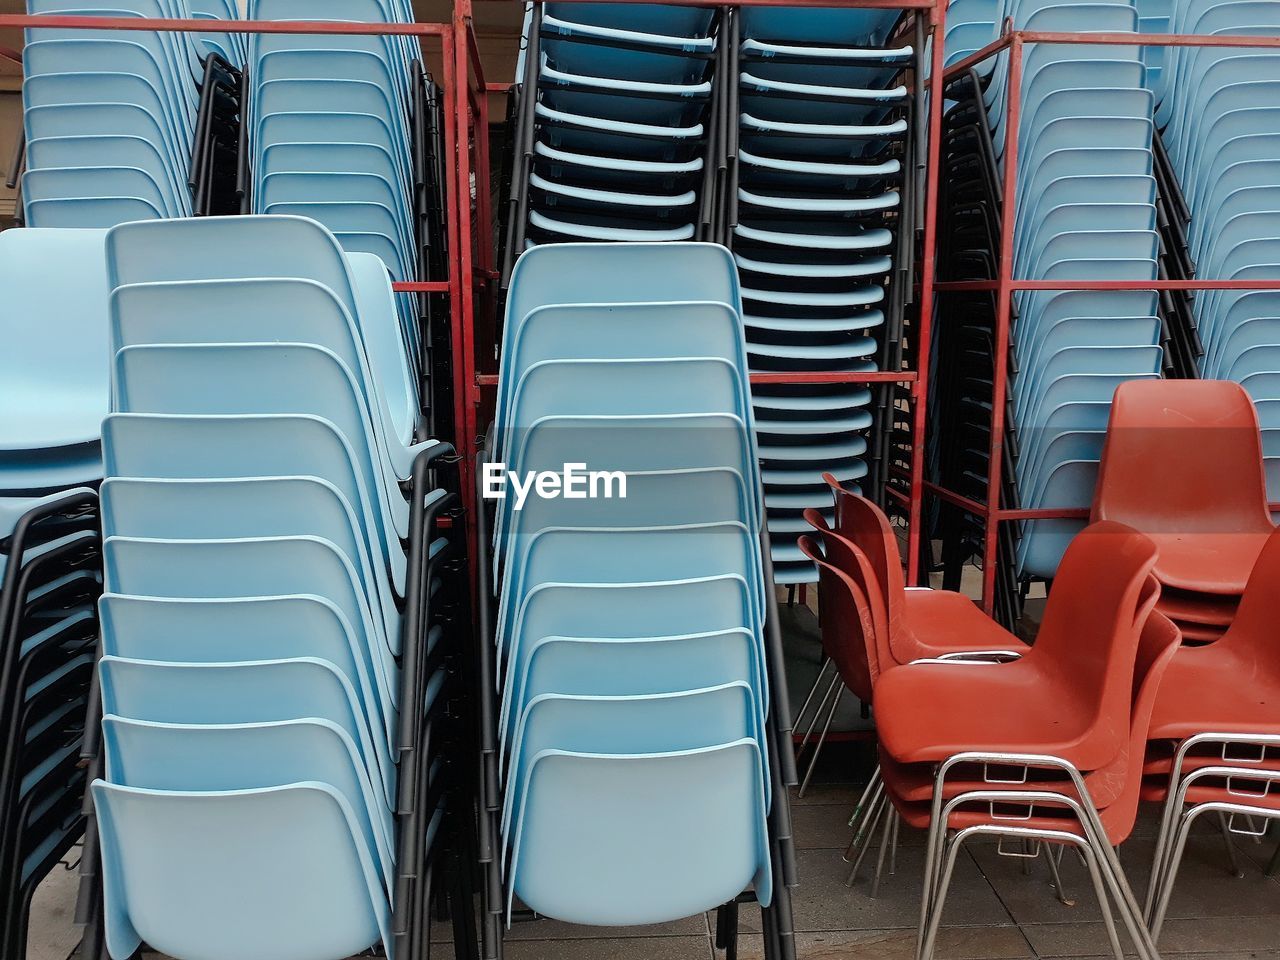 Stacked chairs arranged